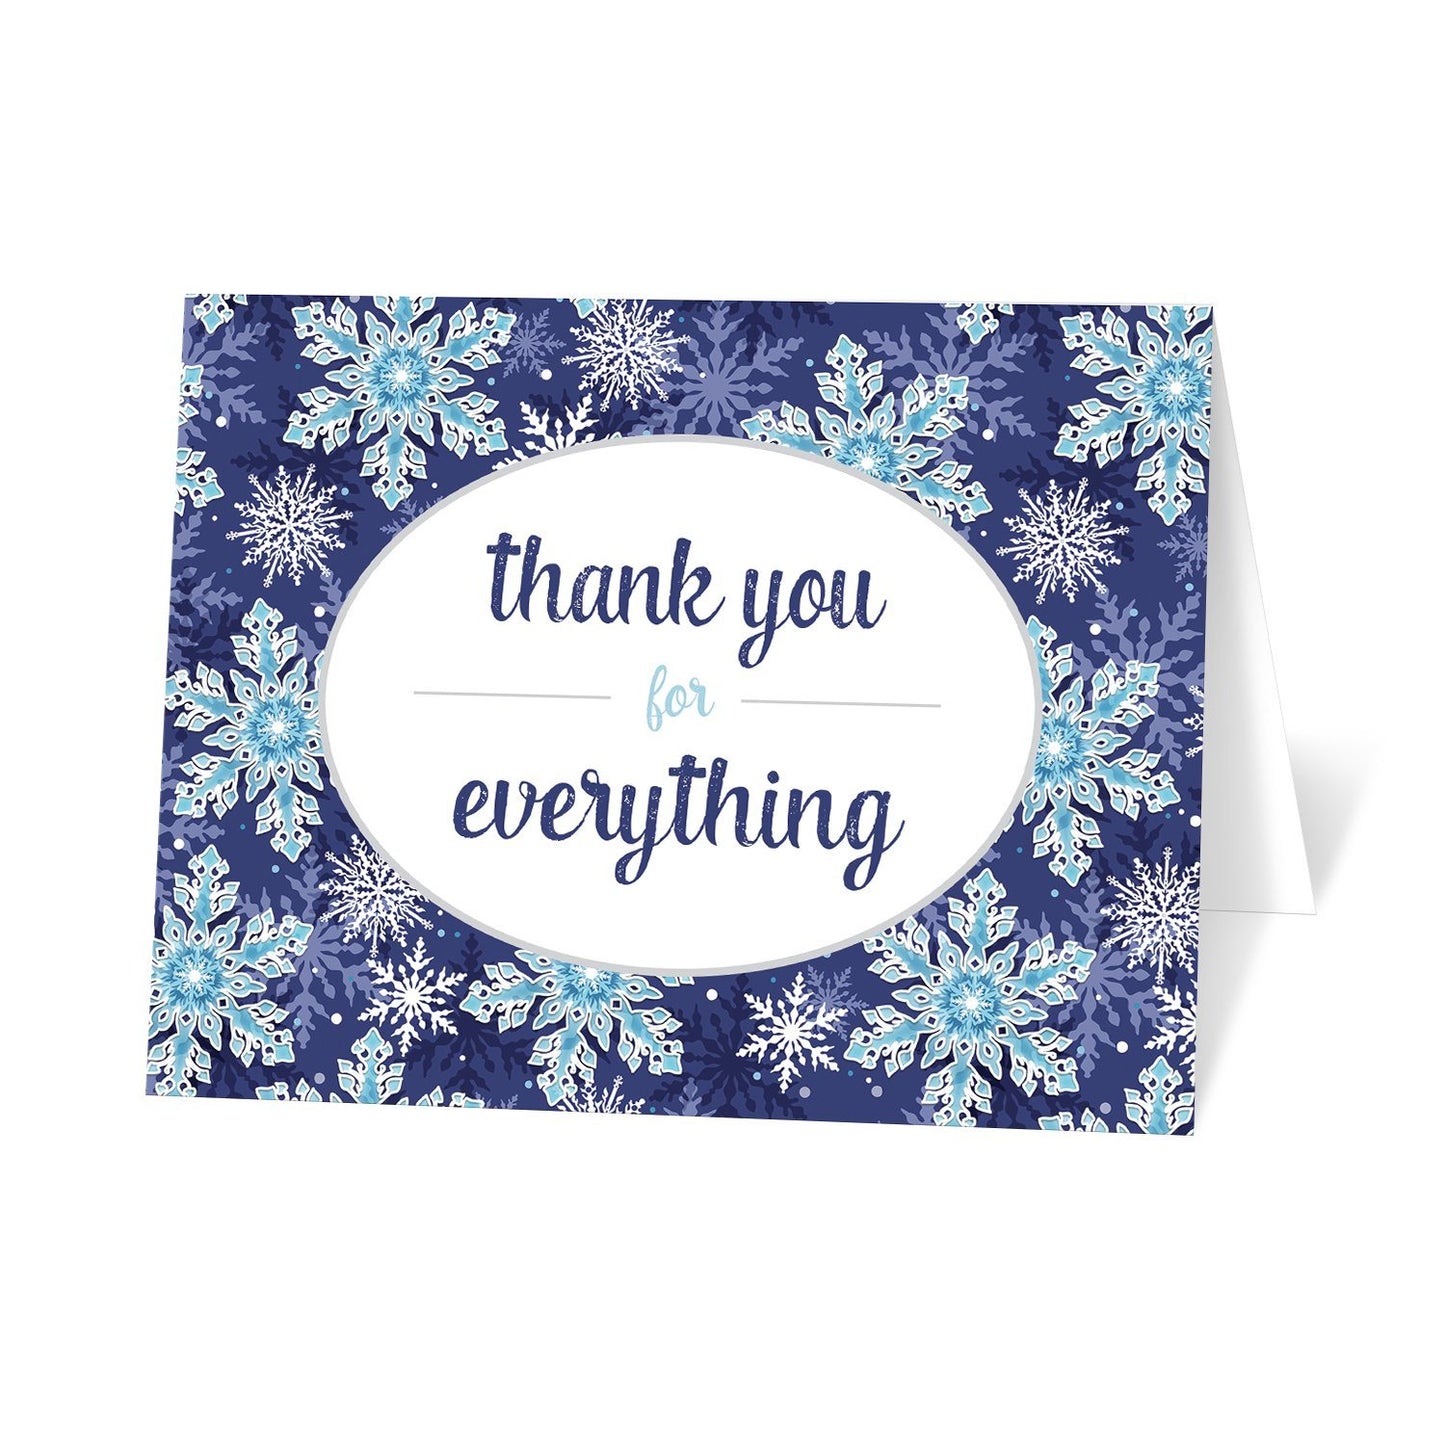 Navy Blue Snowflake Winter Thank You Cards at Artistically Invited